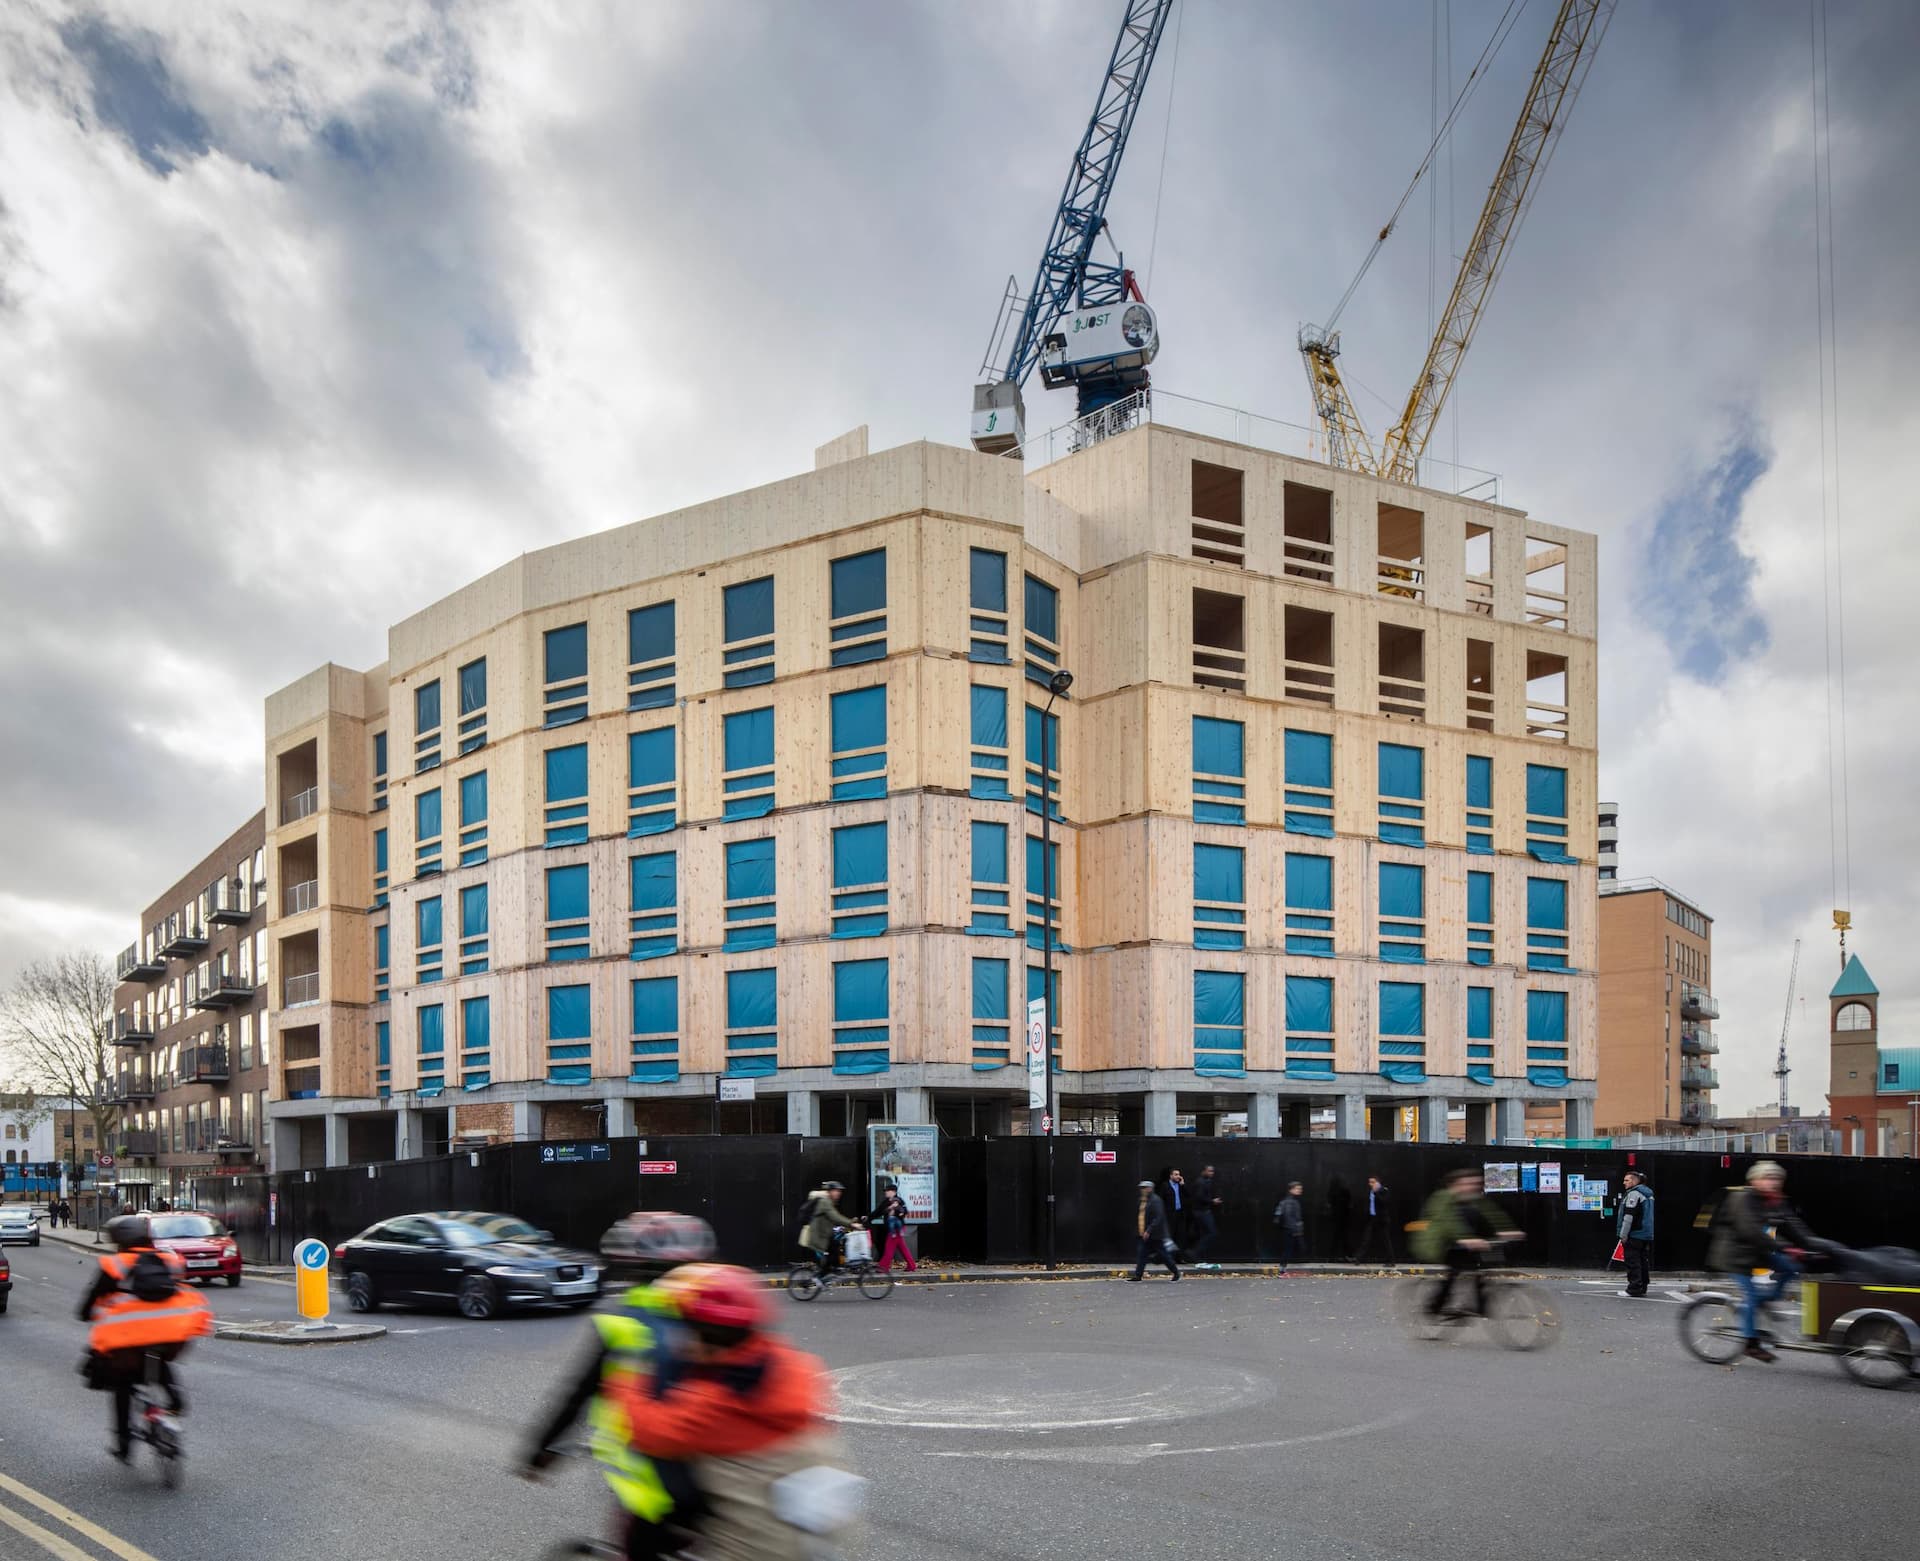 Dalston Works residential timber building in the UK, largest by volume of its kind